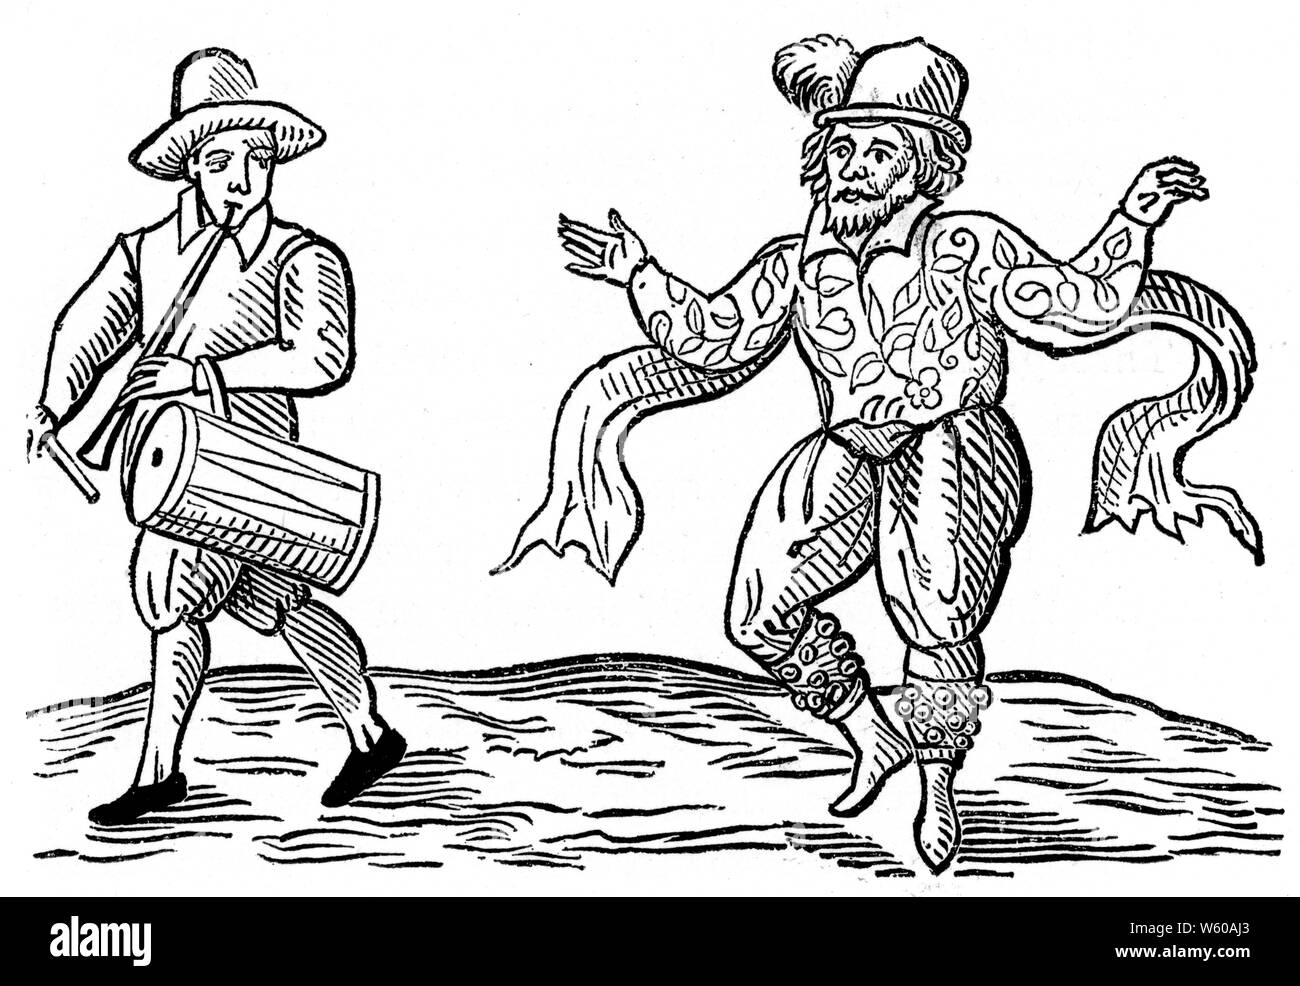 William Kemp dancing the Morris, 1600. The frontispiece from Kemps Nine Daies Wonder Performed in a Daunce From London to Norwich. William Kempe (d1603), commonly referred to as Will Kemp, English actor and dancer specialising in comic roles. Best known for having been one of the original players in early dramas by William Shakespeare. Stock Photo